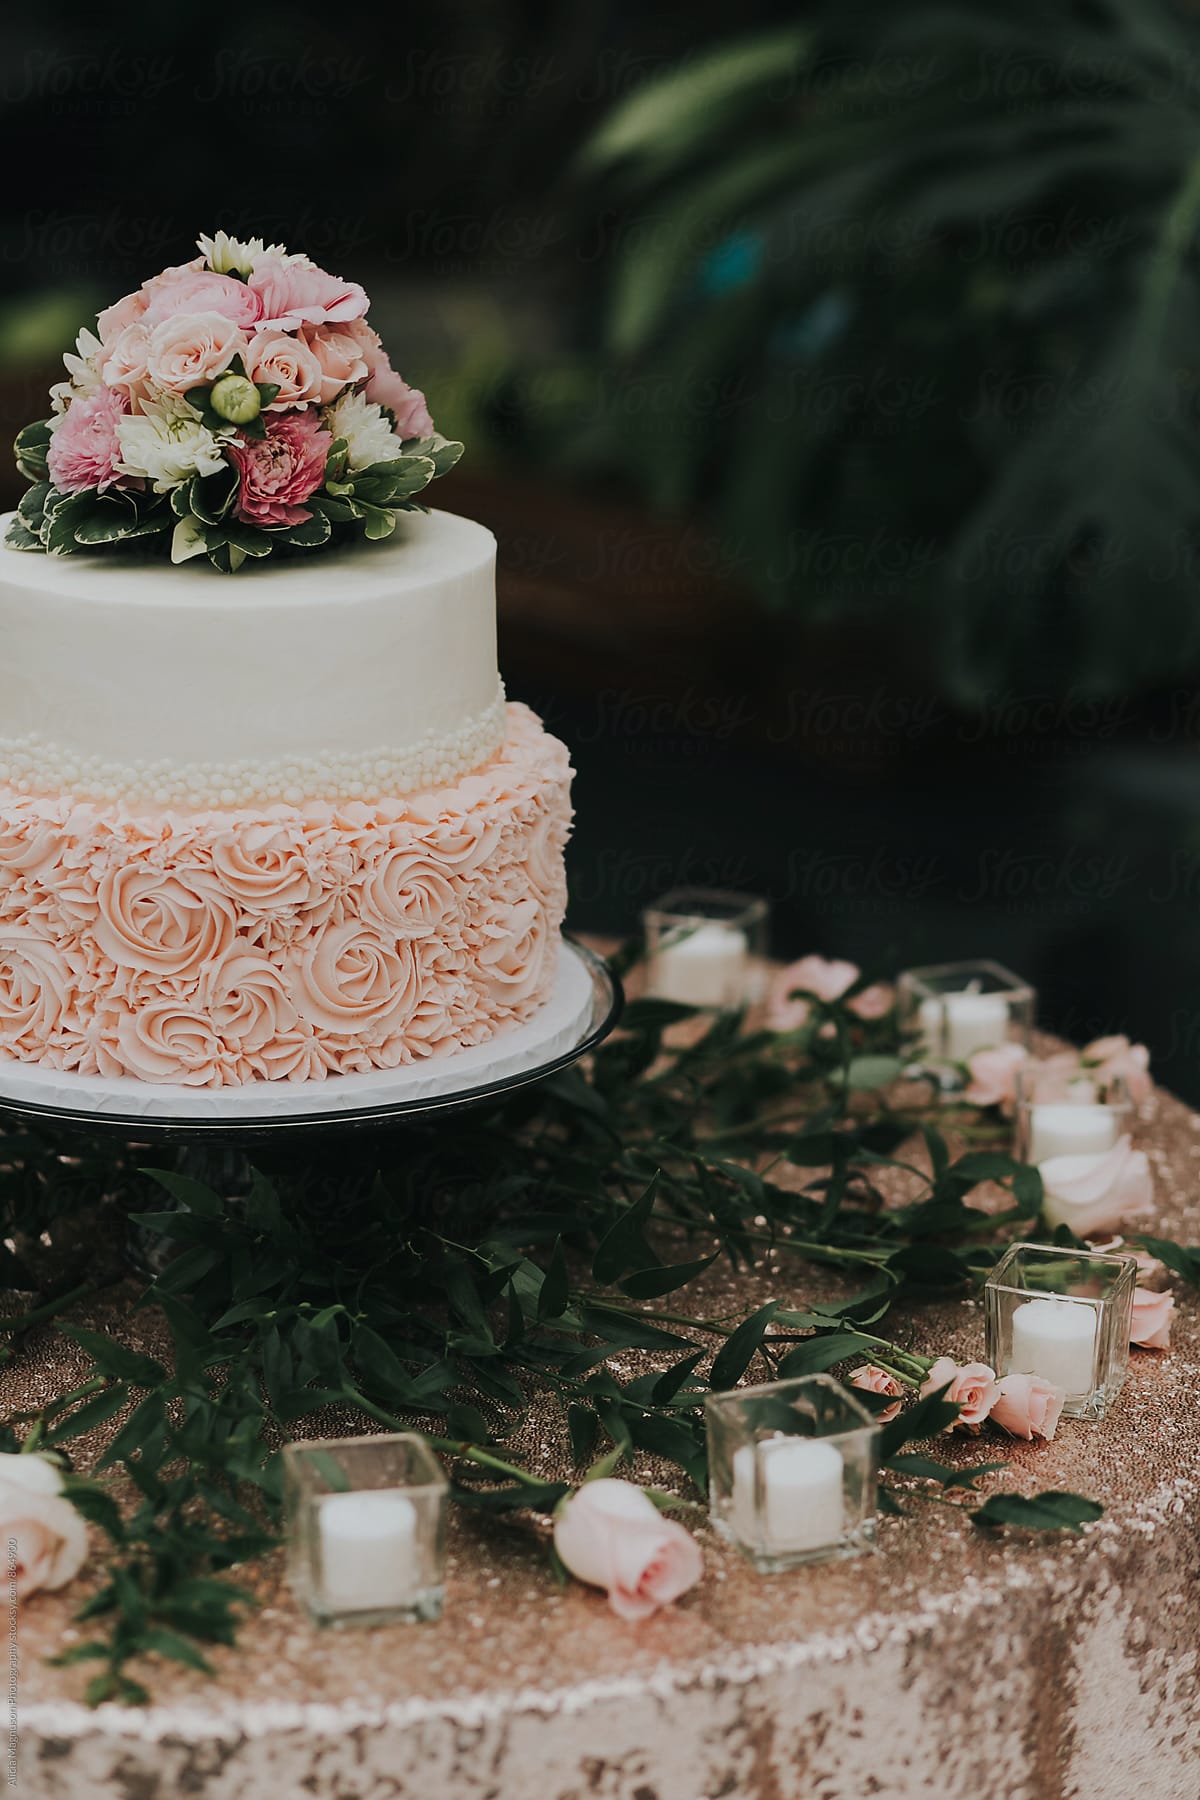 Detail of Blush Pink and White Wedding Cake on Candlelit Table